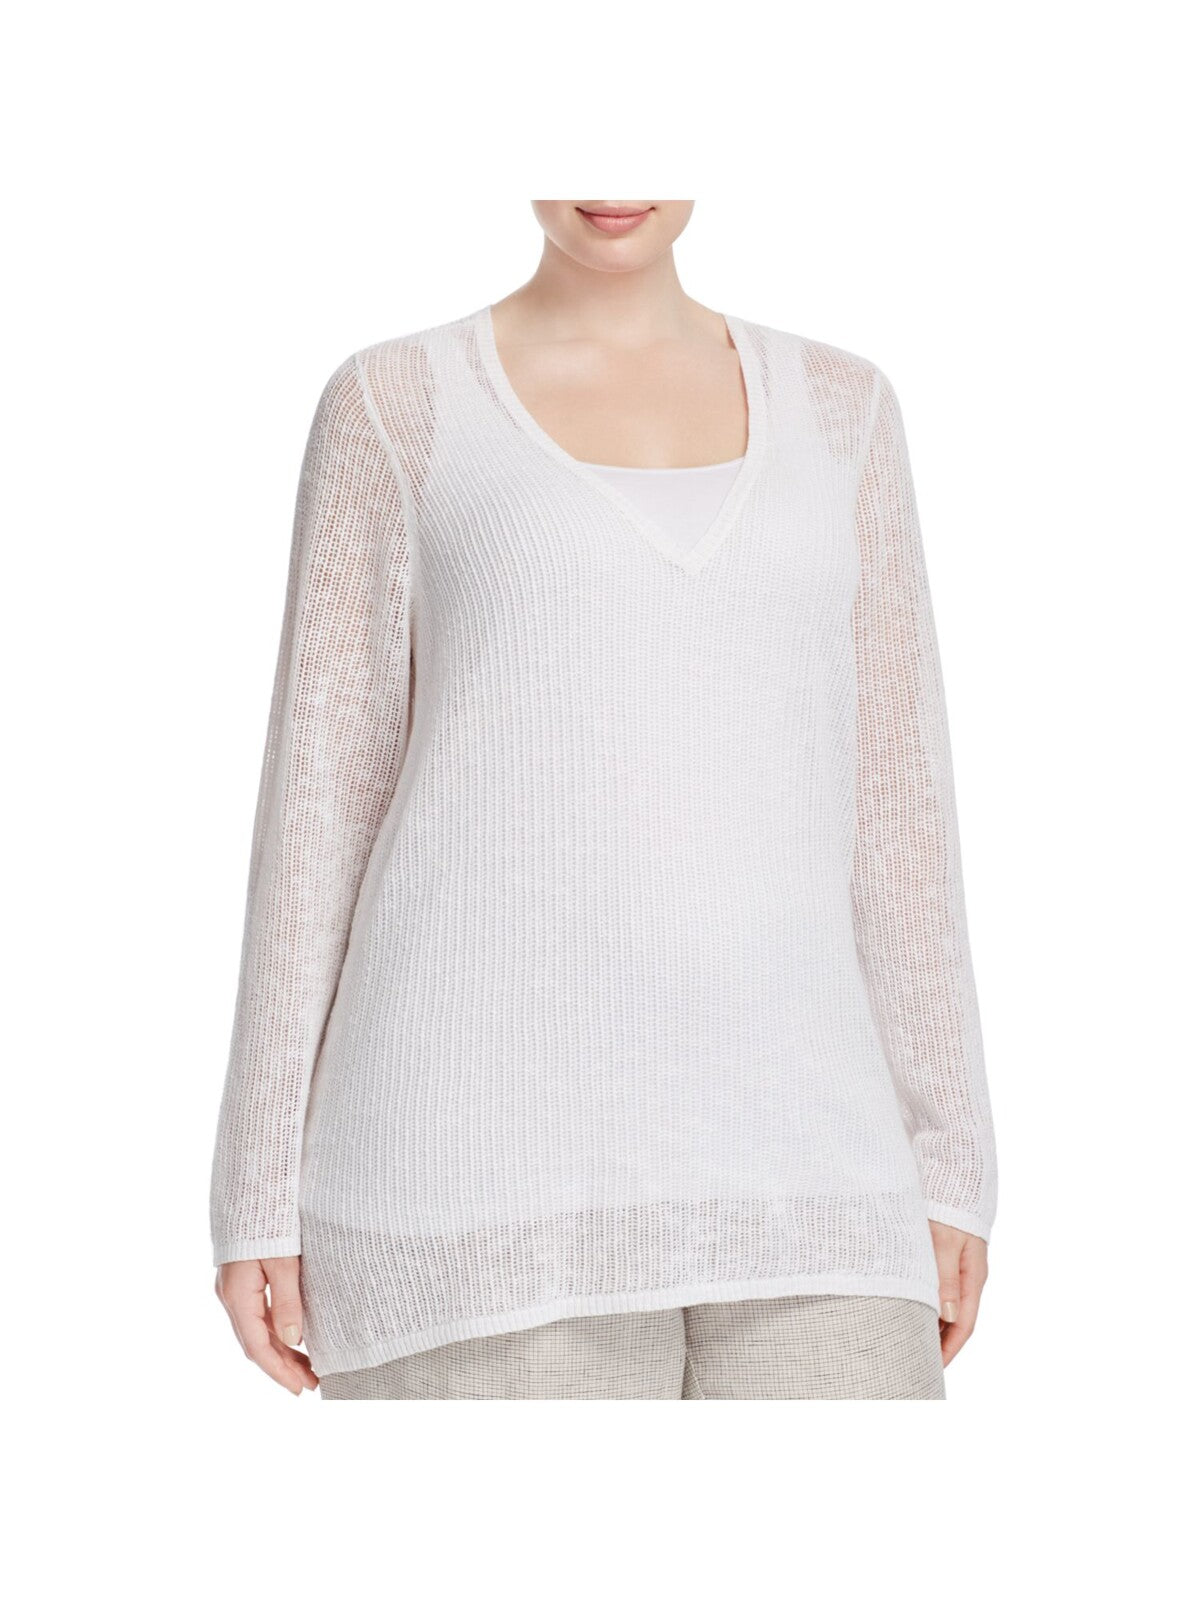 EILEEN FISHER Womens White Stretch Sheer Slitted Long Sleeve V Neck Sweater Plus 1X